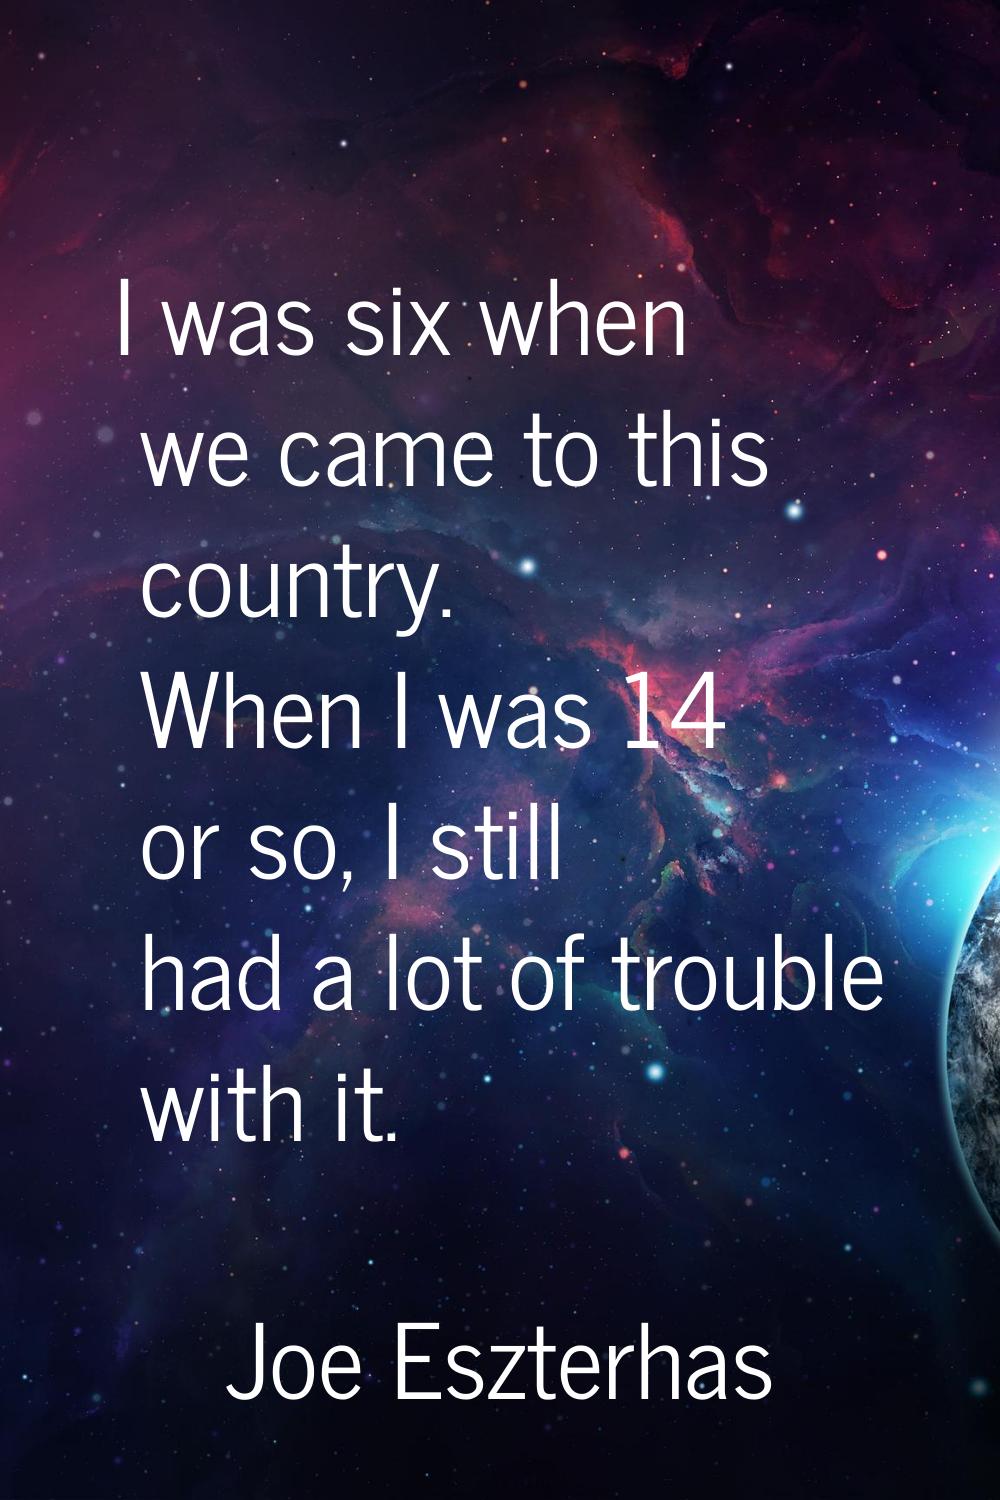 I was six when we came to this country. When I was 14 or so, I still had a lot of trouble with it.